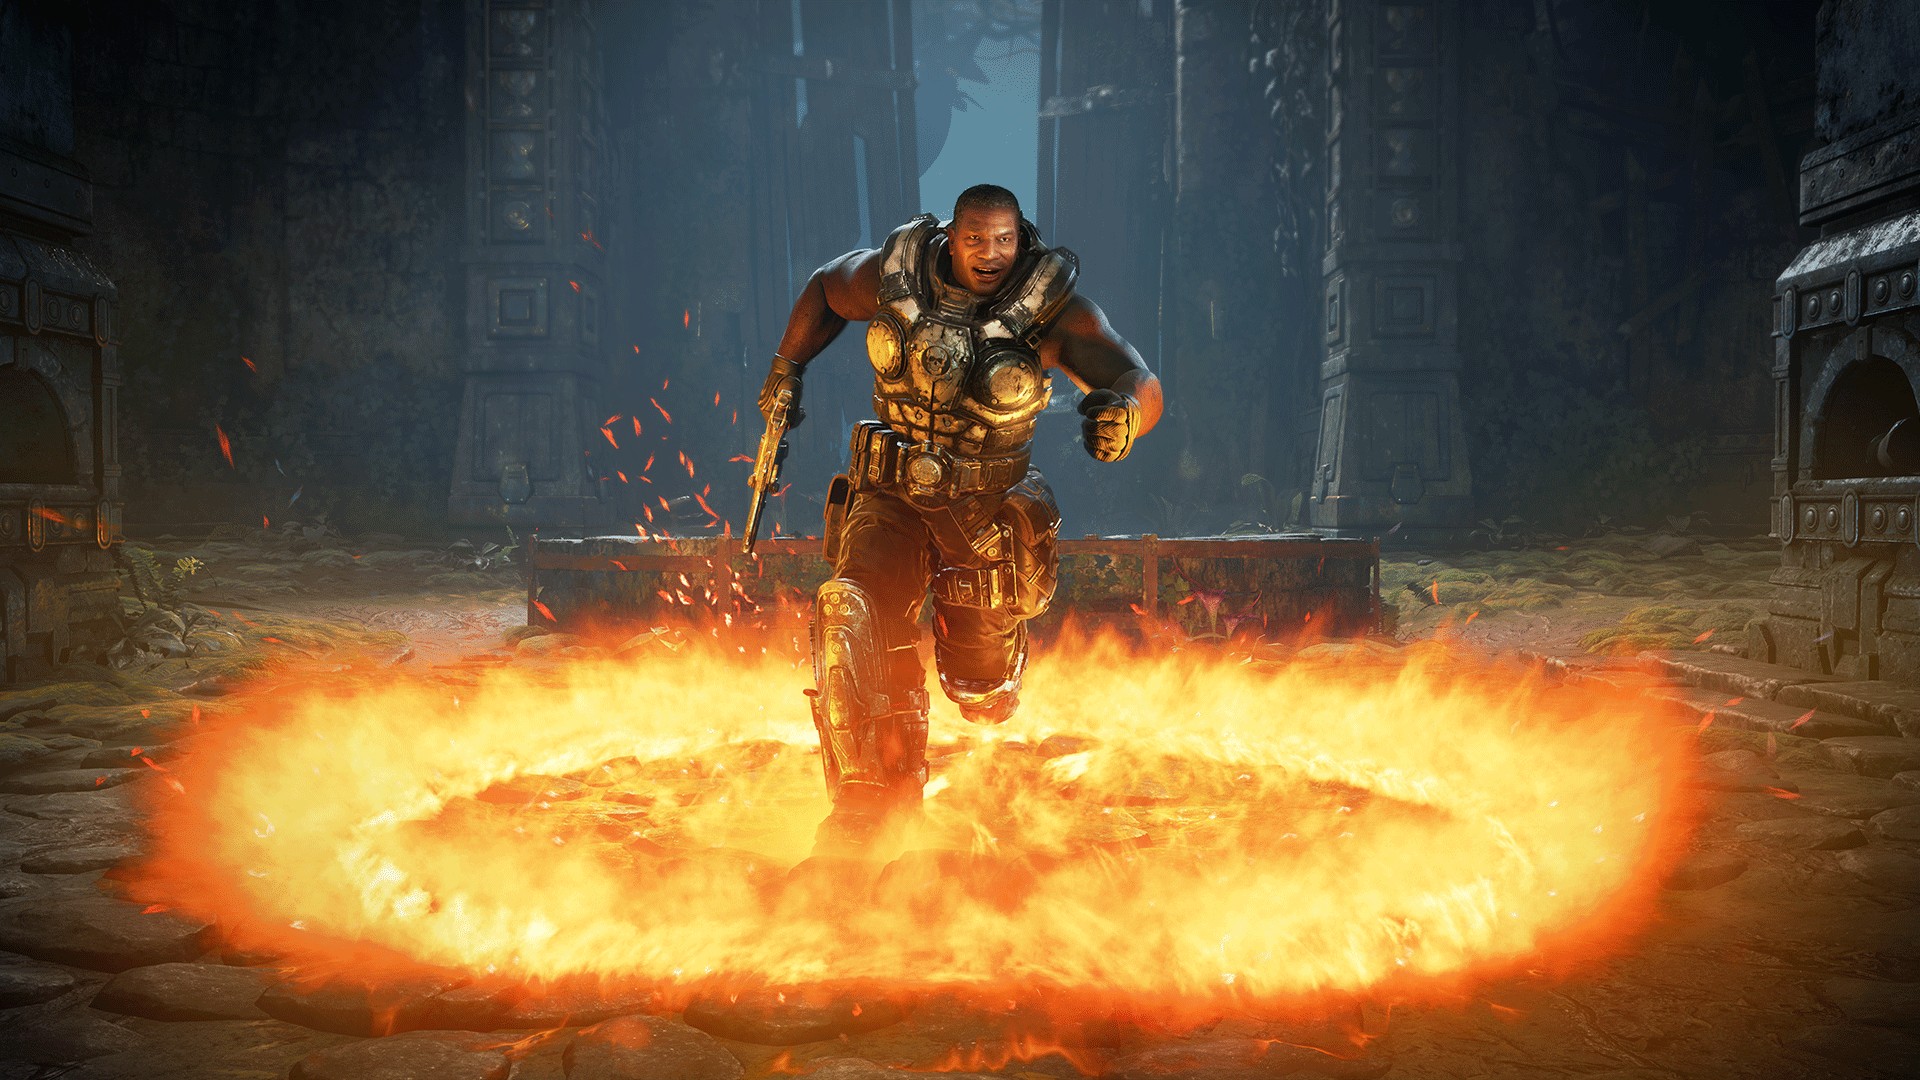 Gears 5's Horde Mode Improves On A Series Favourite